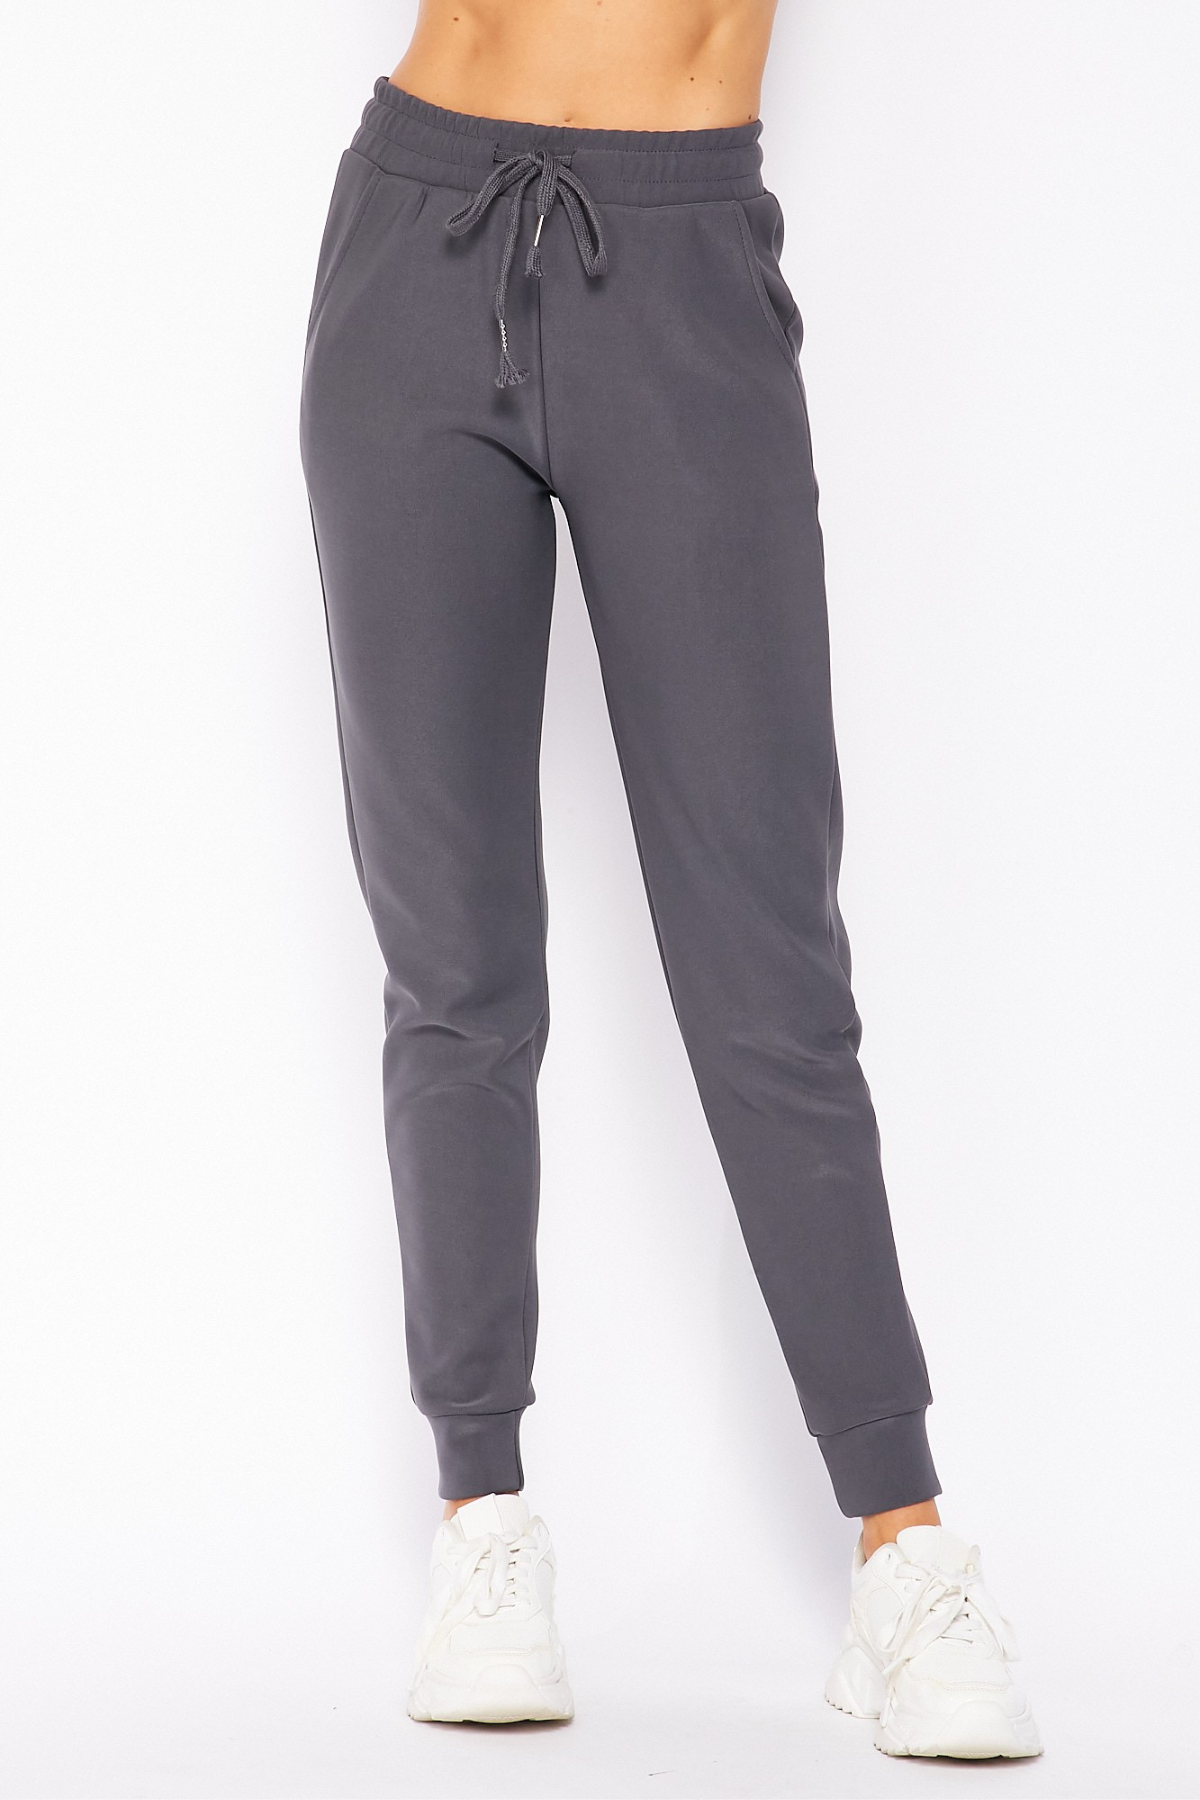 Run With It Charcoal Joggers